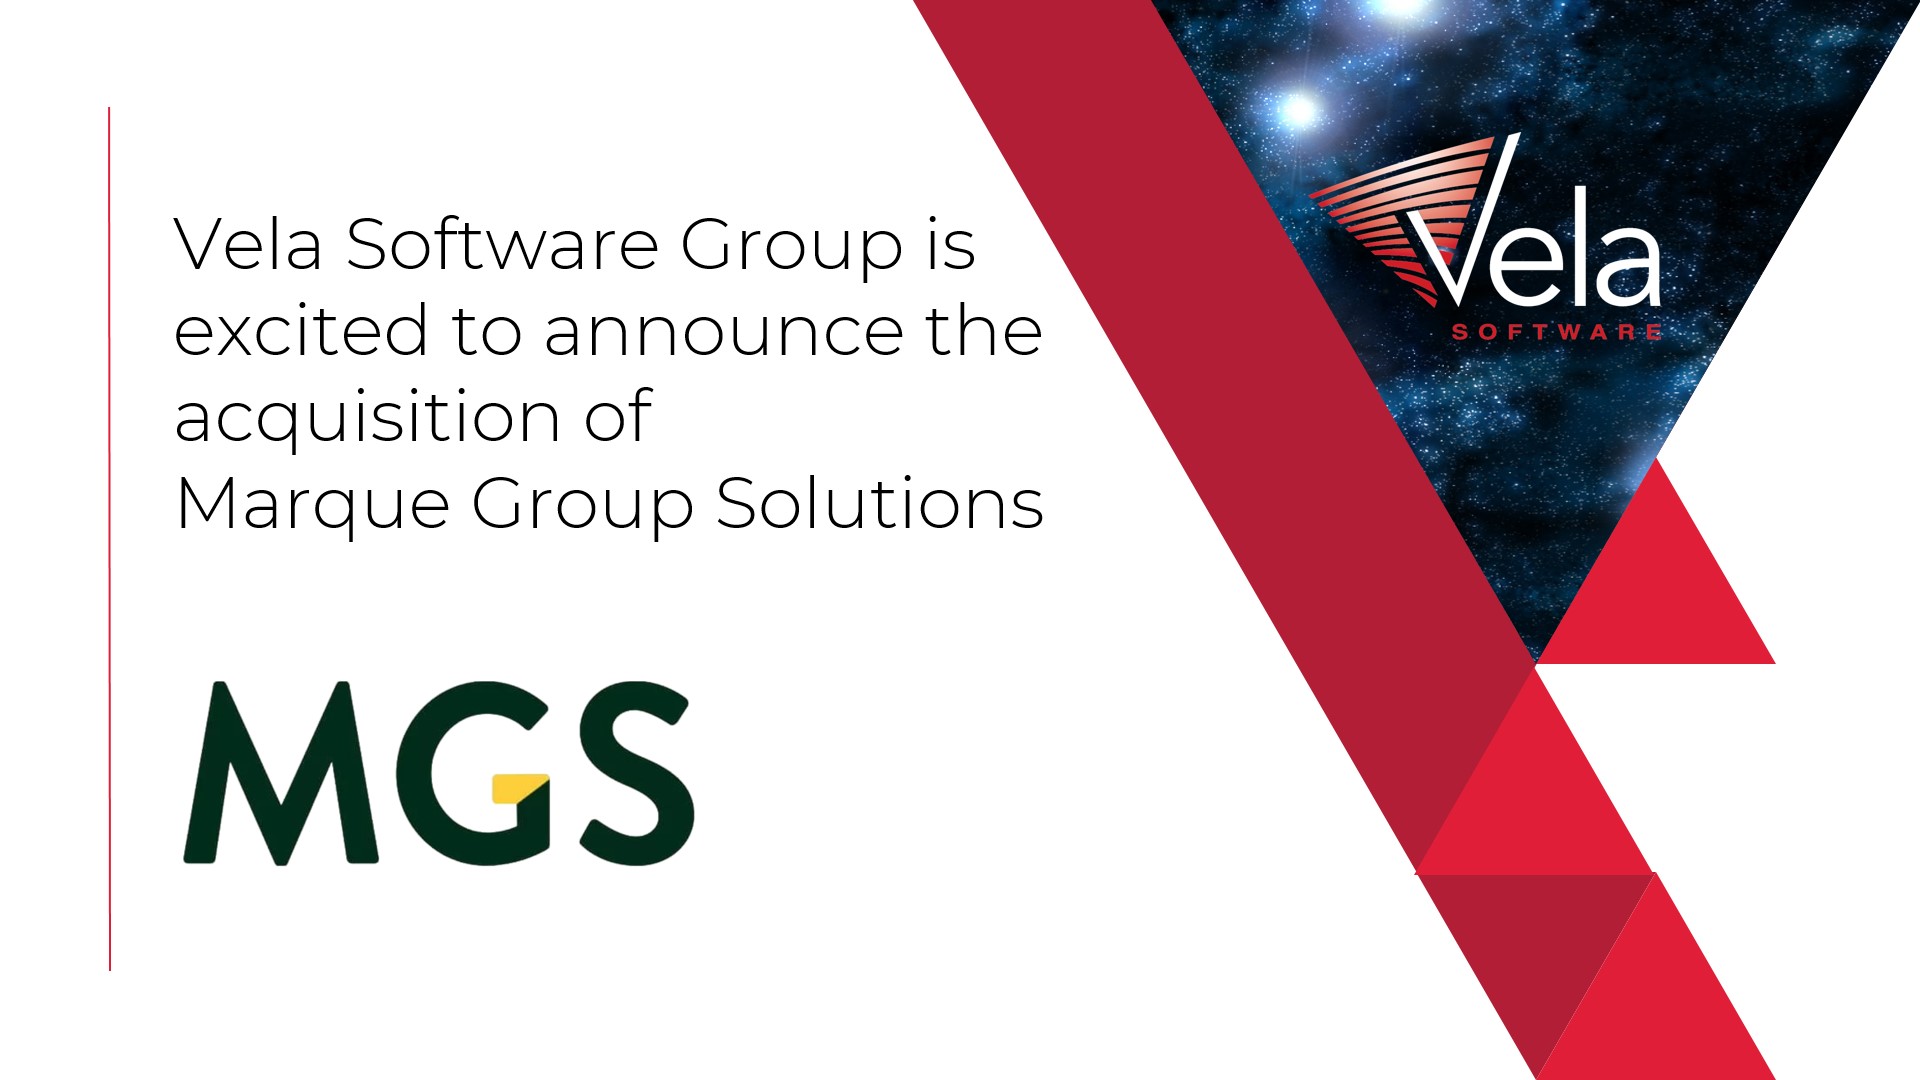 Vela Software Group acquires Marque Group Solutions